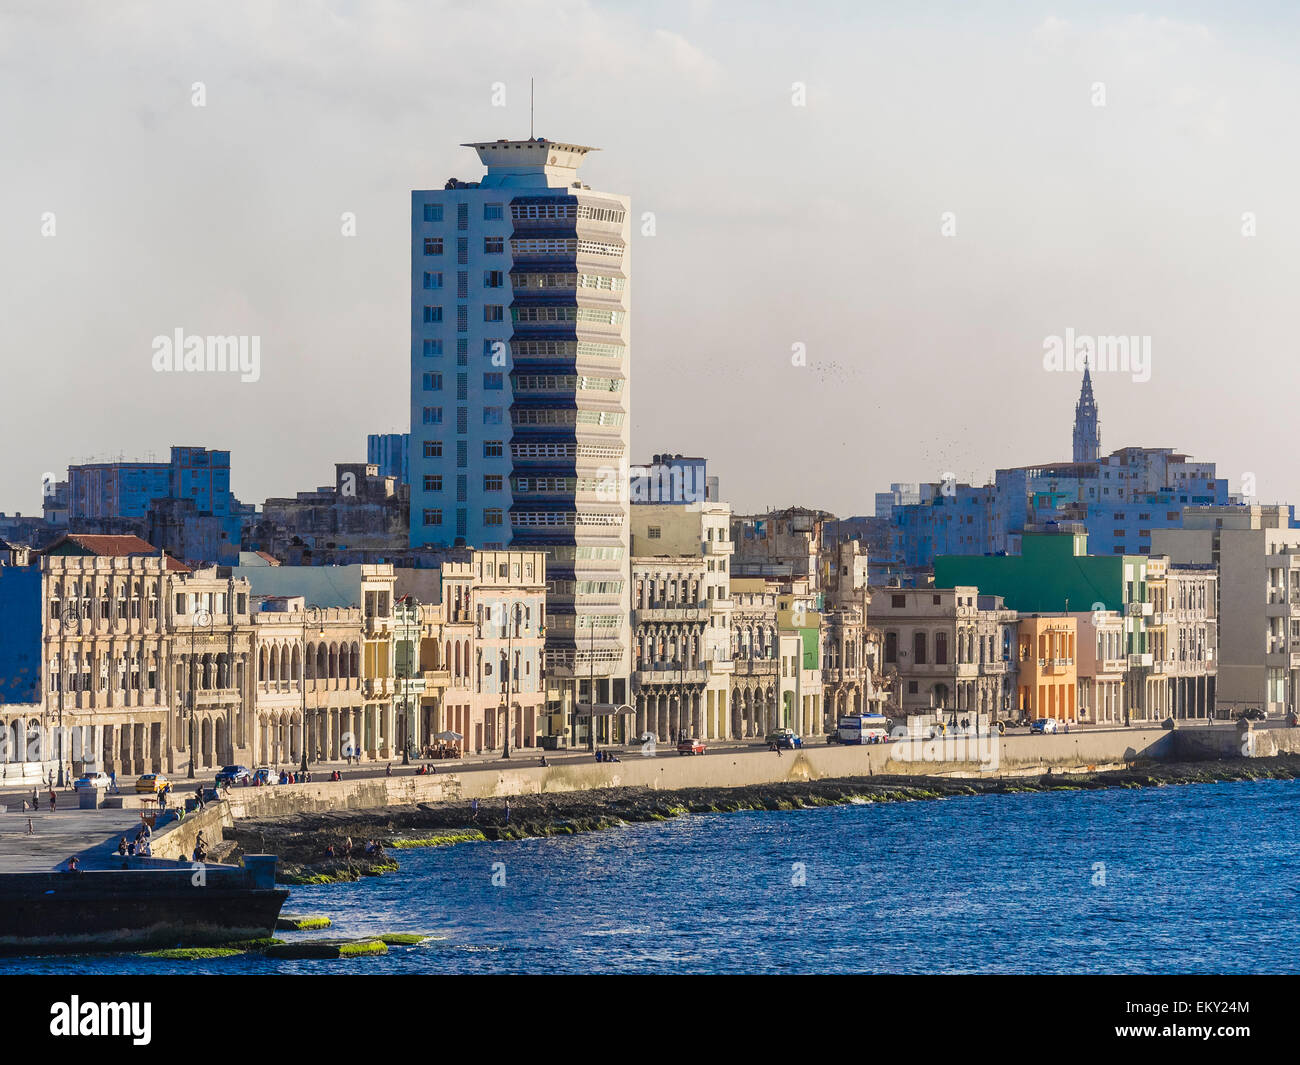 A view from across Havana Bay of the buildings along the Malecon on the waterfront of Havana Vieja, Cuba. Stock Photo